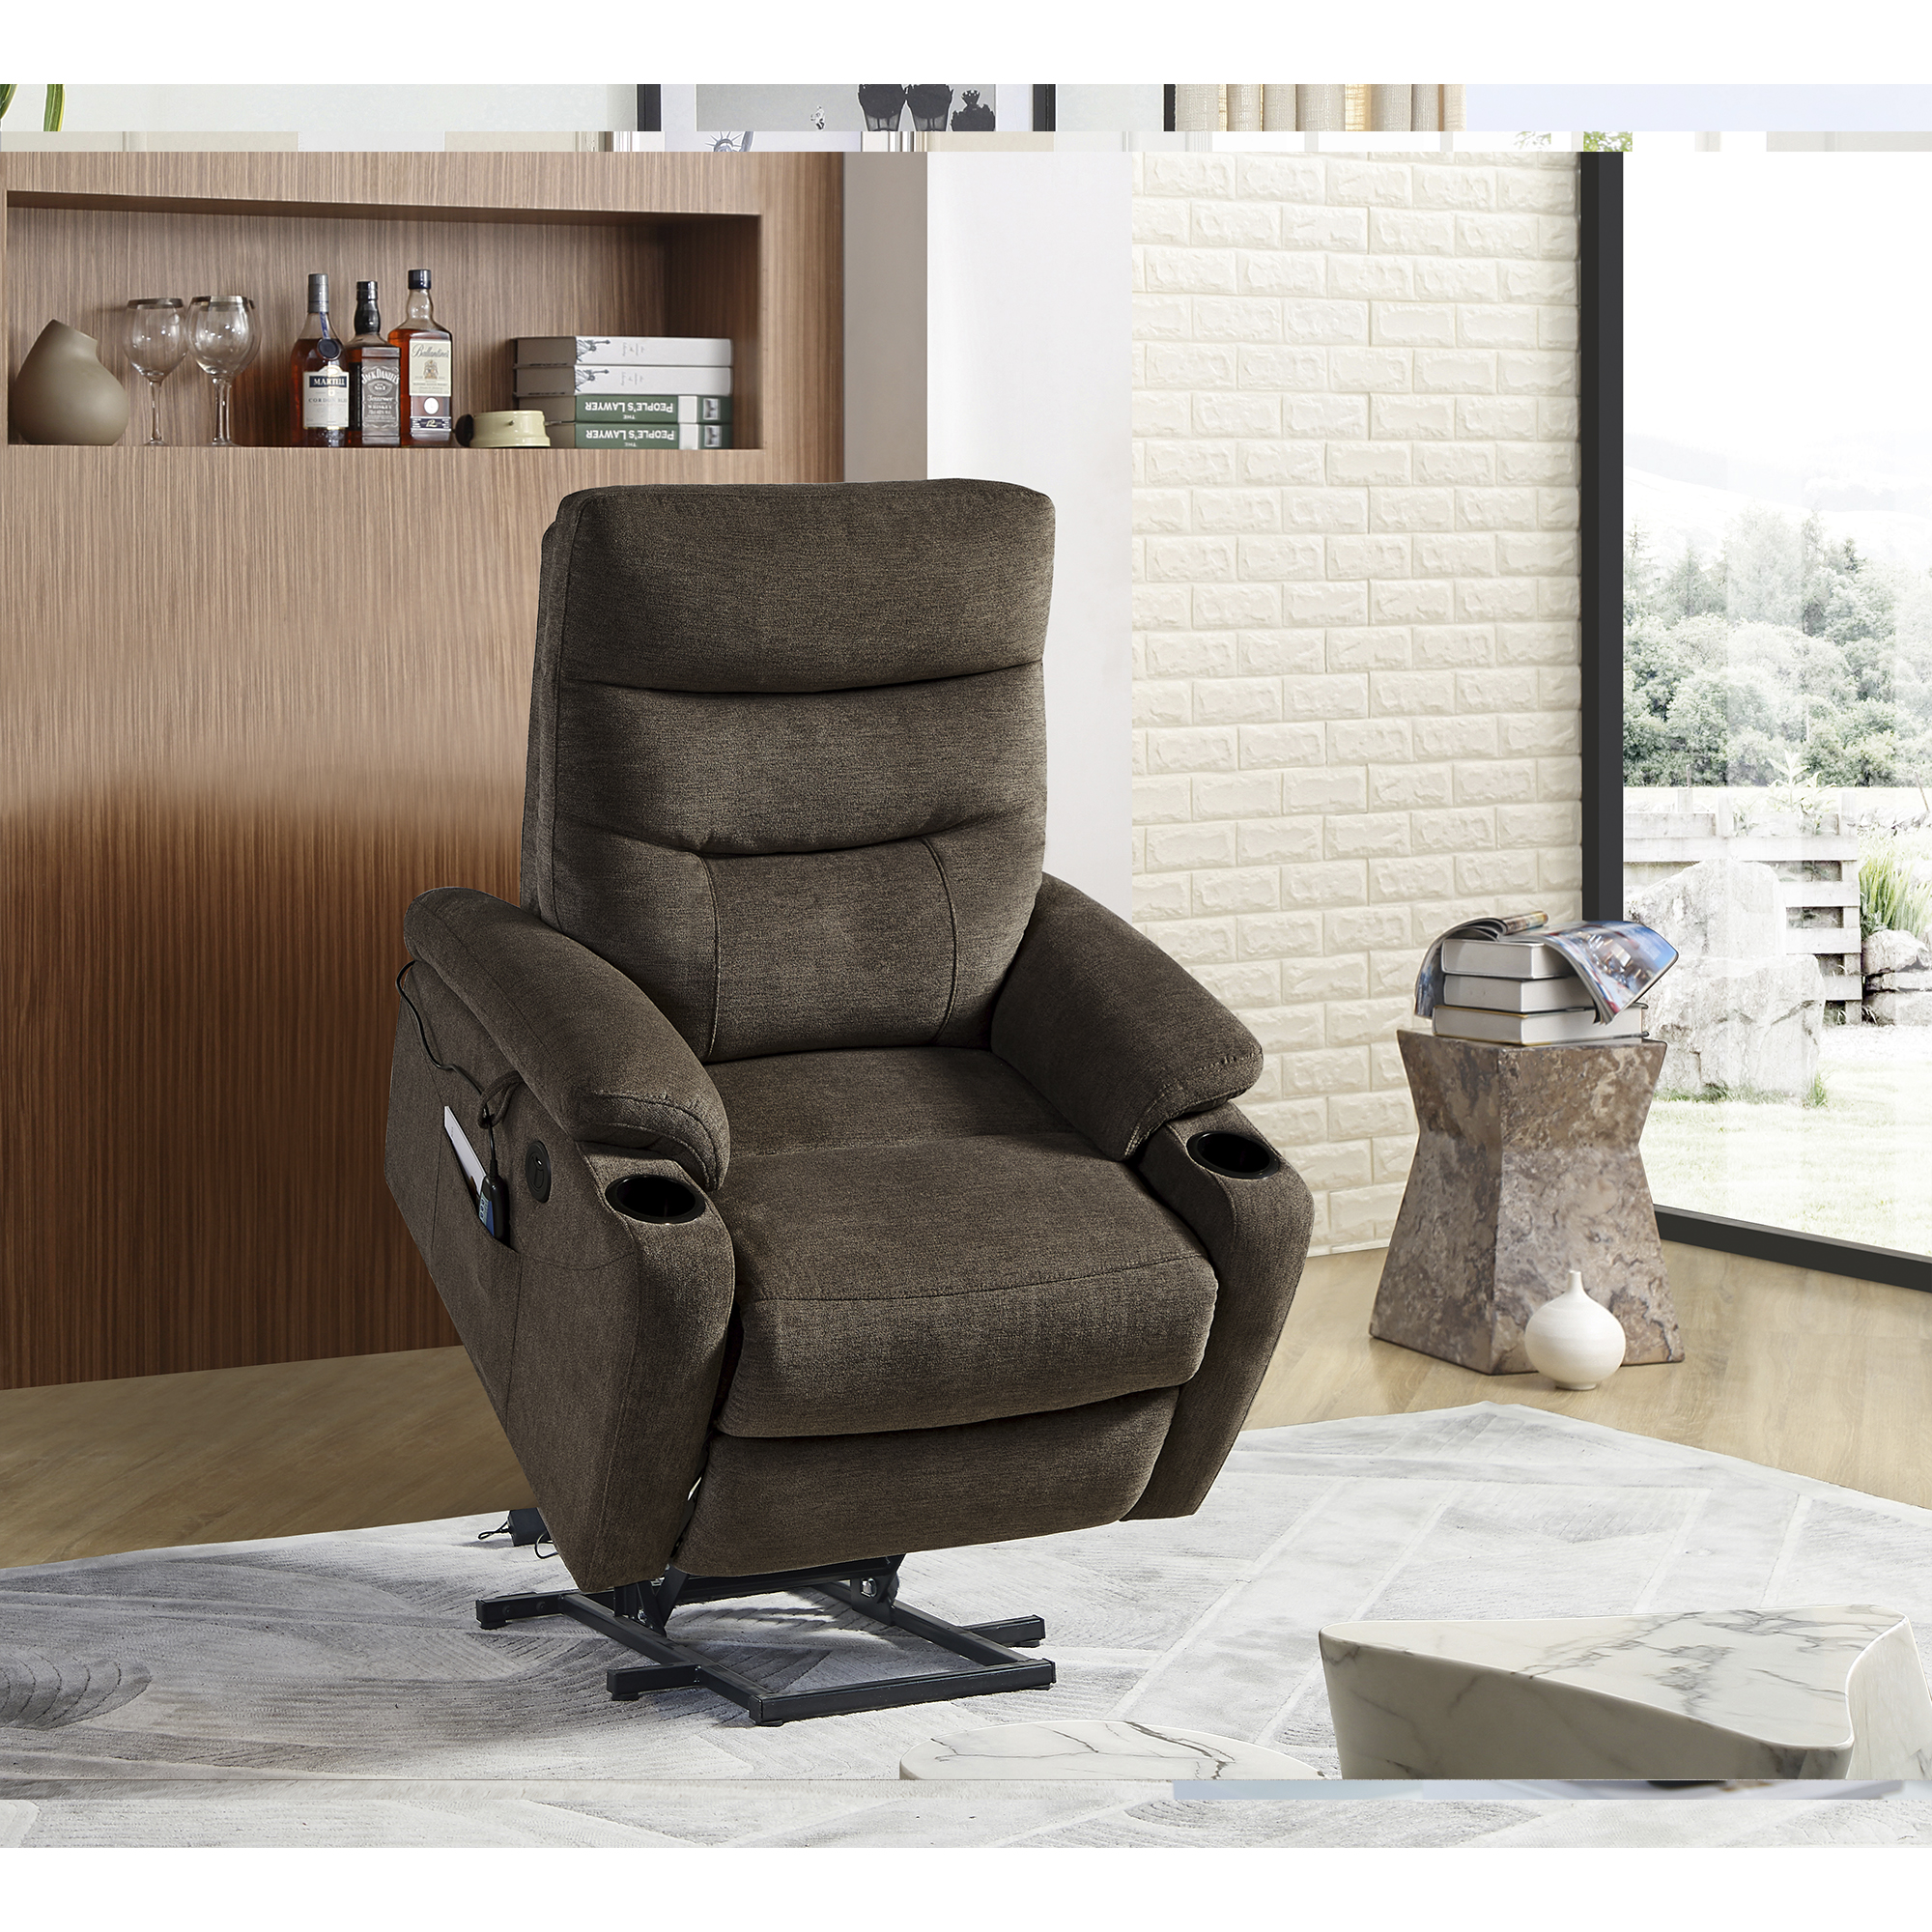 Liyasi Electric Power Lift Recliner Chair Sofa with Massage and Heat for Elderly, 3 Positions, 2 Side Pockets and Cup Holders, USB Ports, High-end quality fabric-Boyel Living